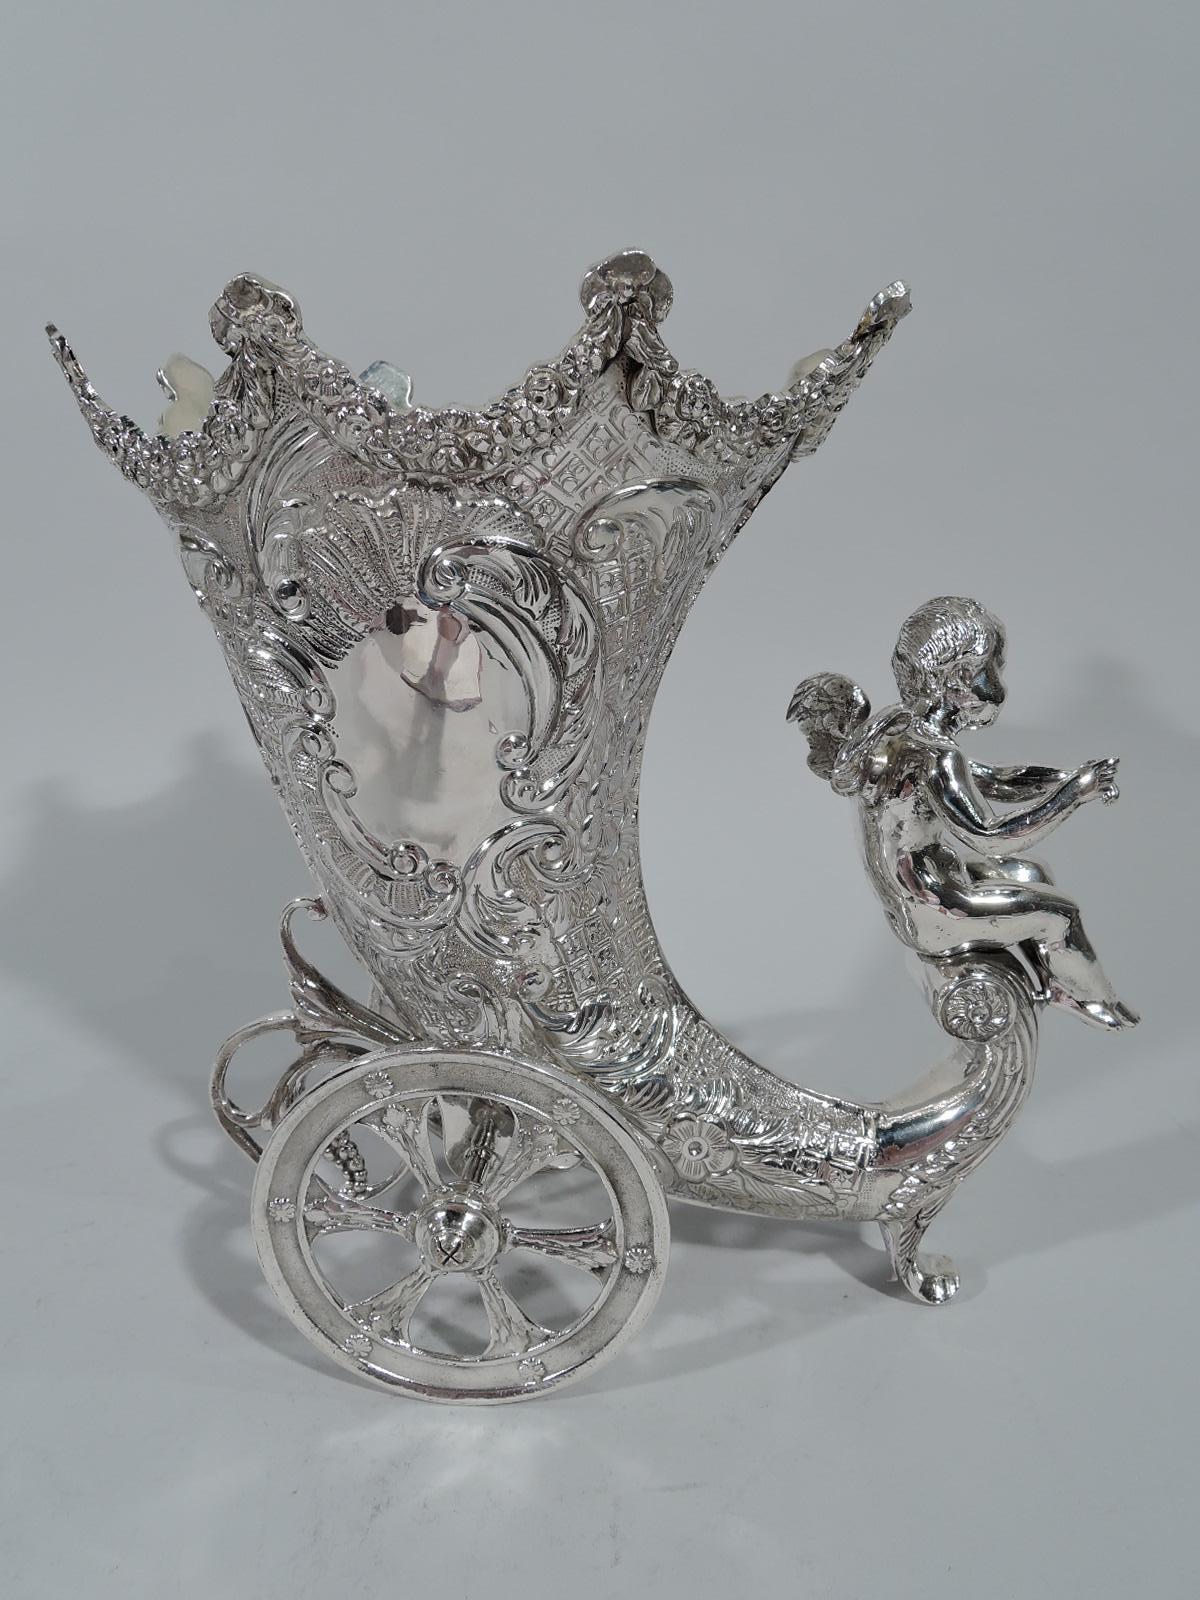 German Rococo revival sterling silver centerpiece vase, circa 1950. Cornucopia with garlanded rim and rising volute scroll base. Axel-mounted with rotating wheels. Tolled and chased, flowers, leafy scrolls, and diaper, and stippling. Asymmetrical